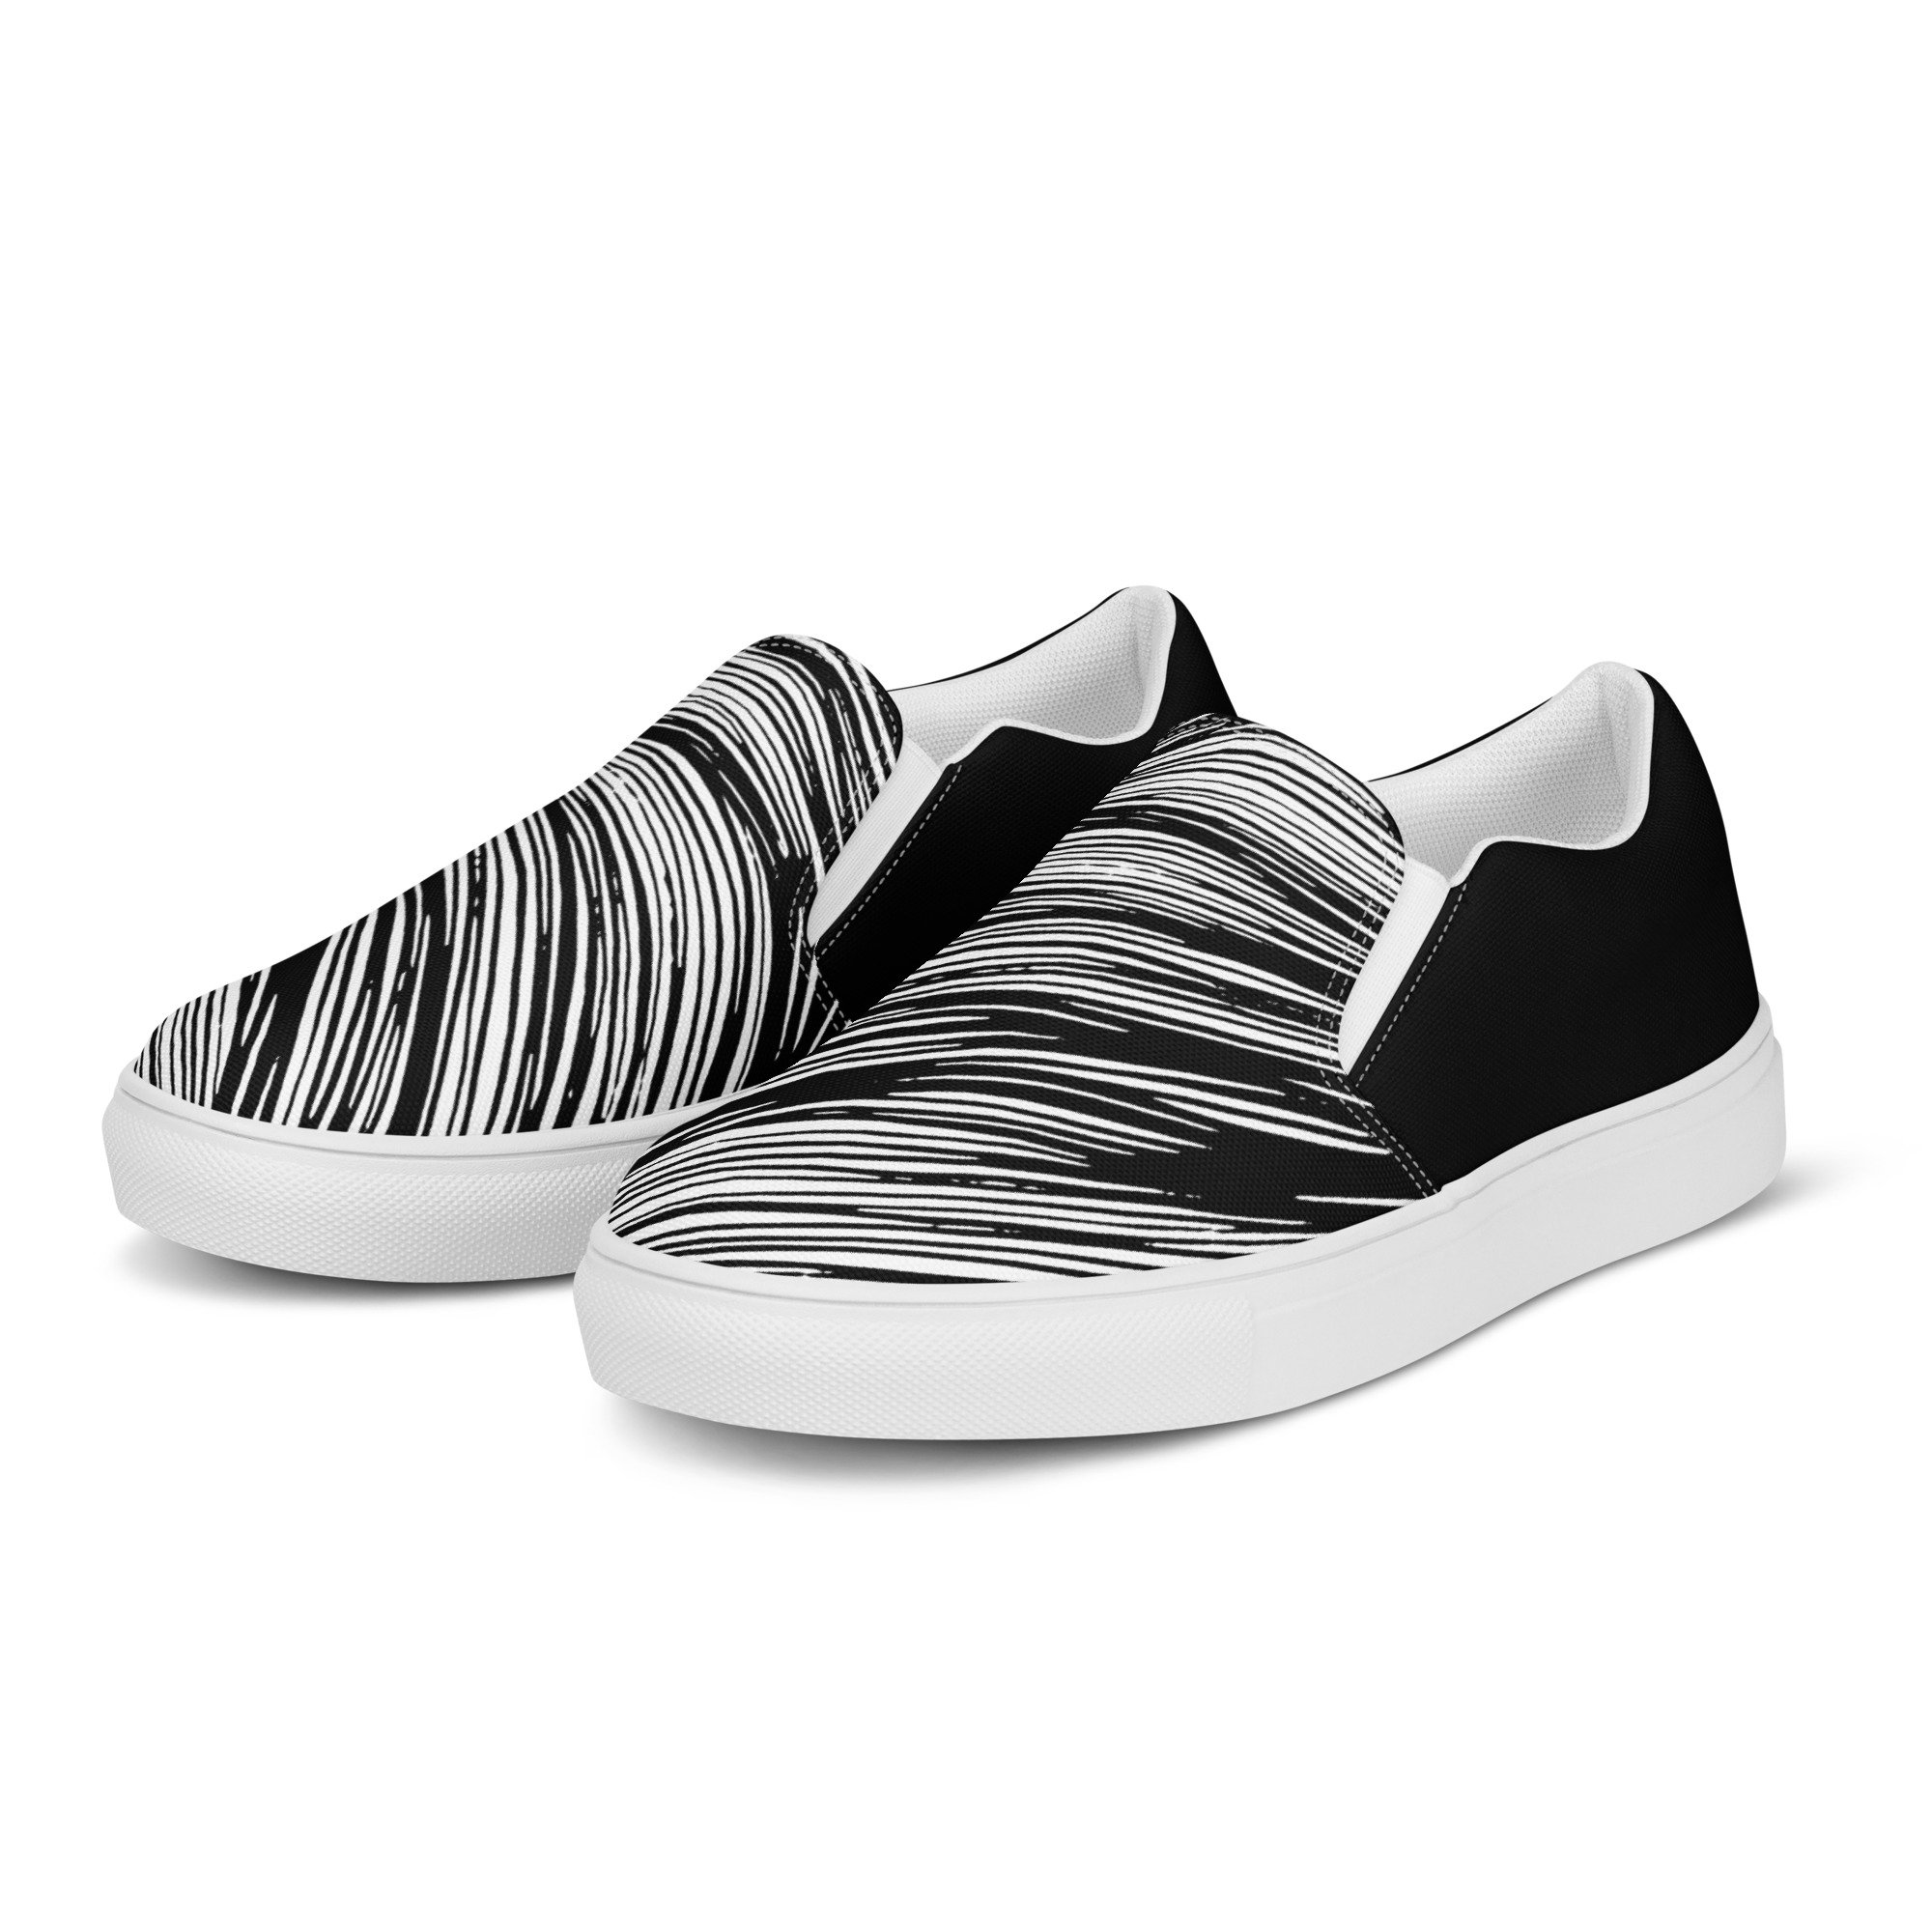 4Aether-slip-on-canvas-shoes-white-left-front-3.jpg